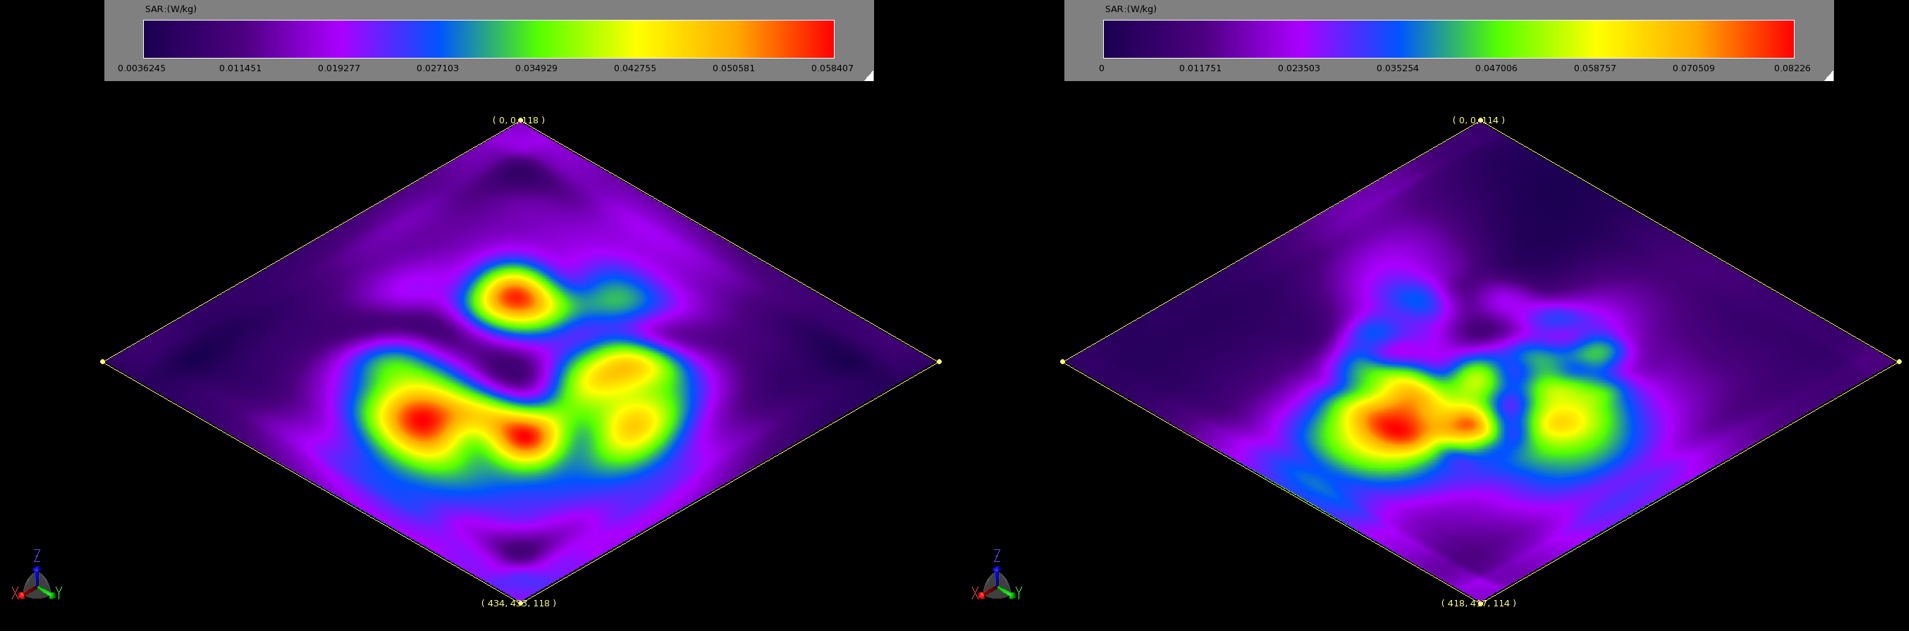 Figure 6: The 10g averaged SAR plots at 2.45 GHz (left, 6a) and 5.5 GHz (right, 6b) indicate the regions with the highest power absorption in the phantom. The values are for an input power of 0.5 W and are well below the allowable standards.